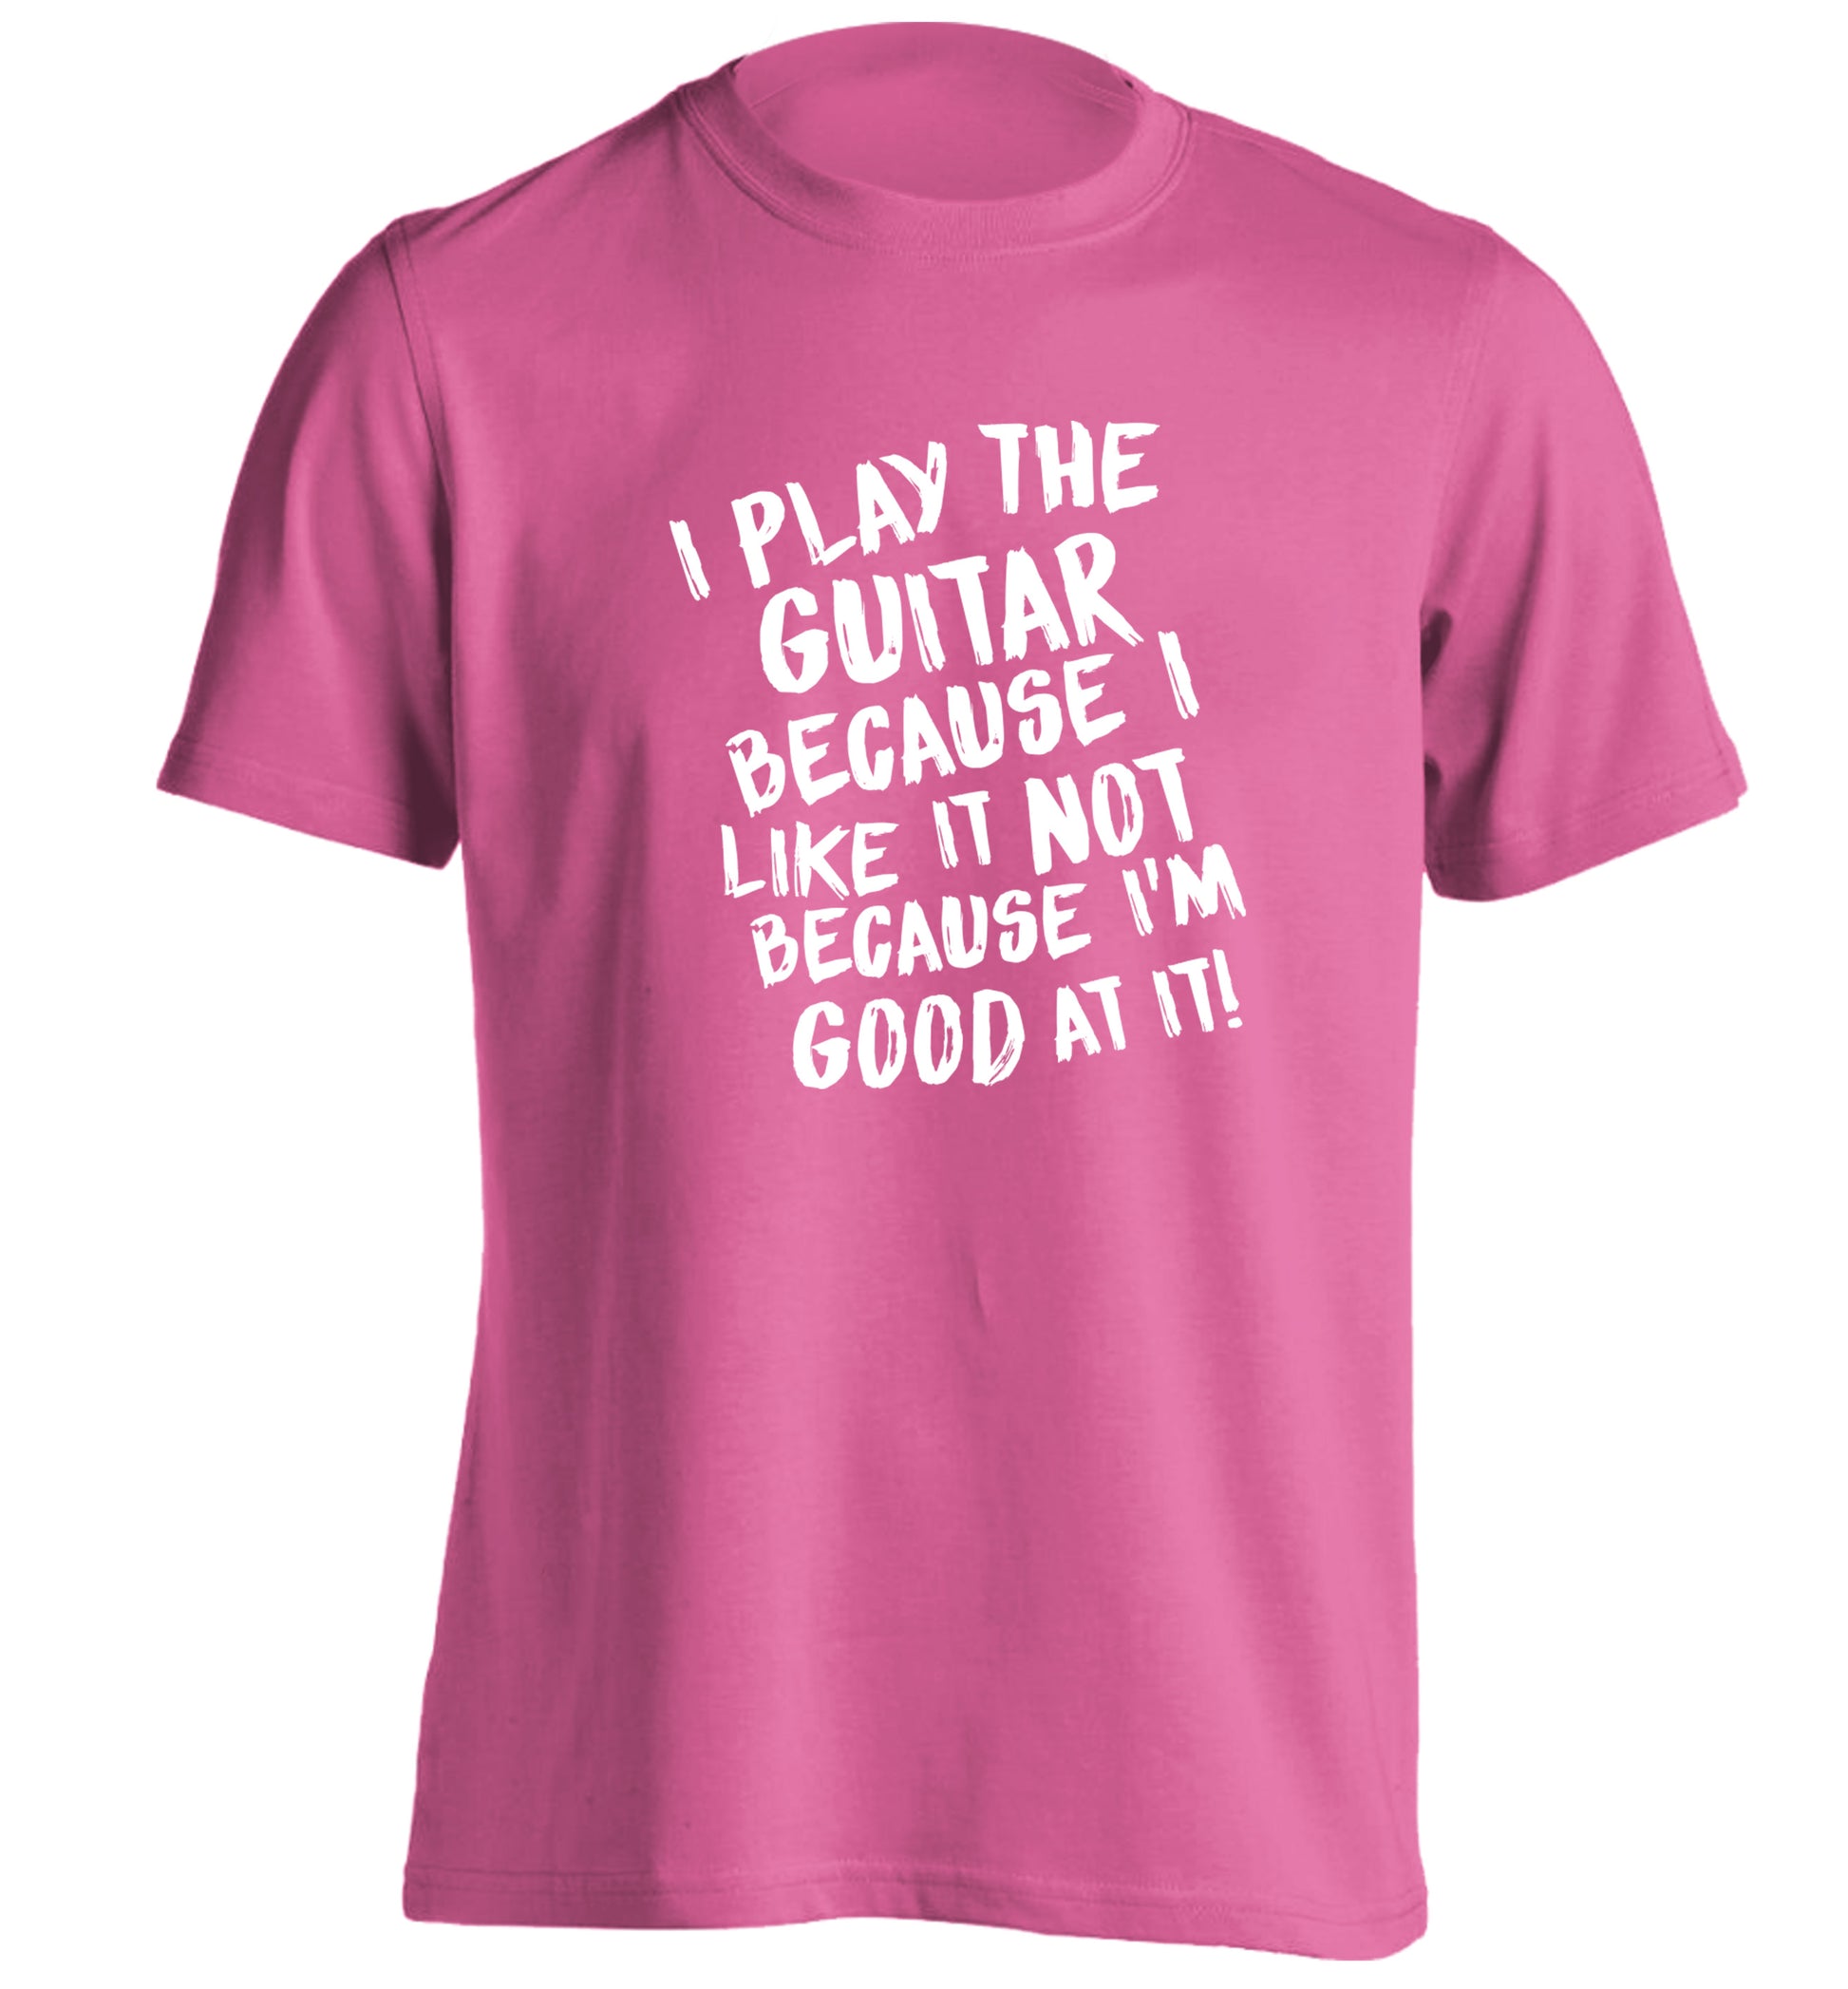 I play the guitar because I like it not because I'm good at it adults unisex pink Tshirt 2XL